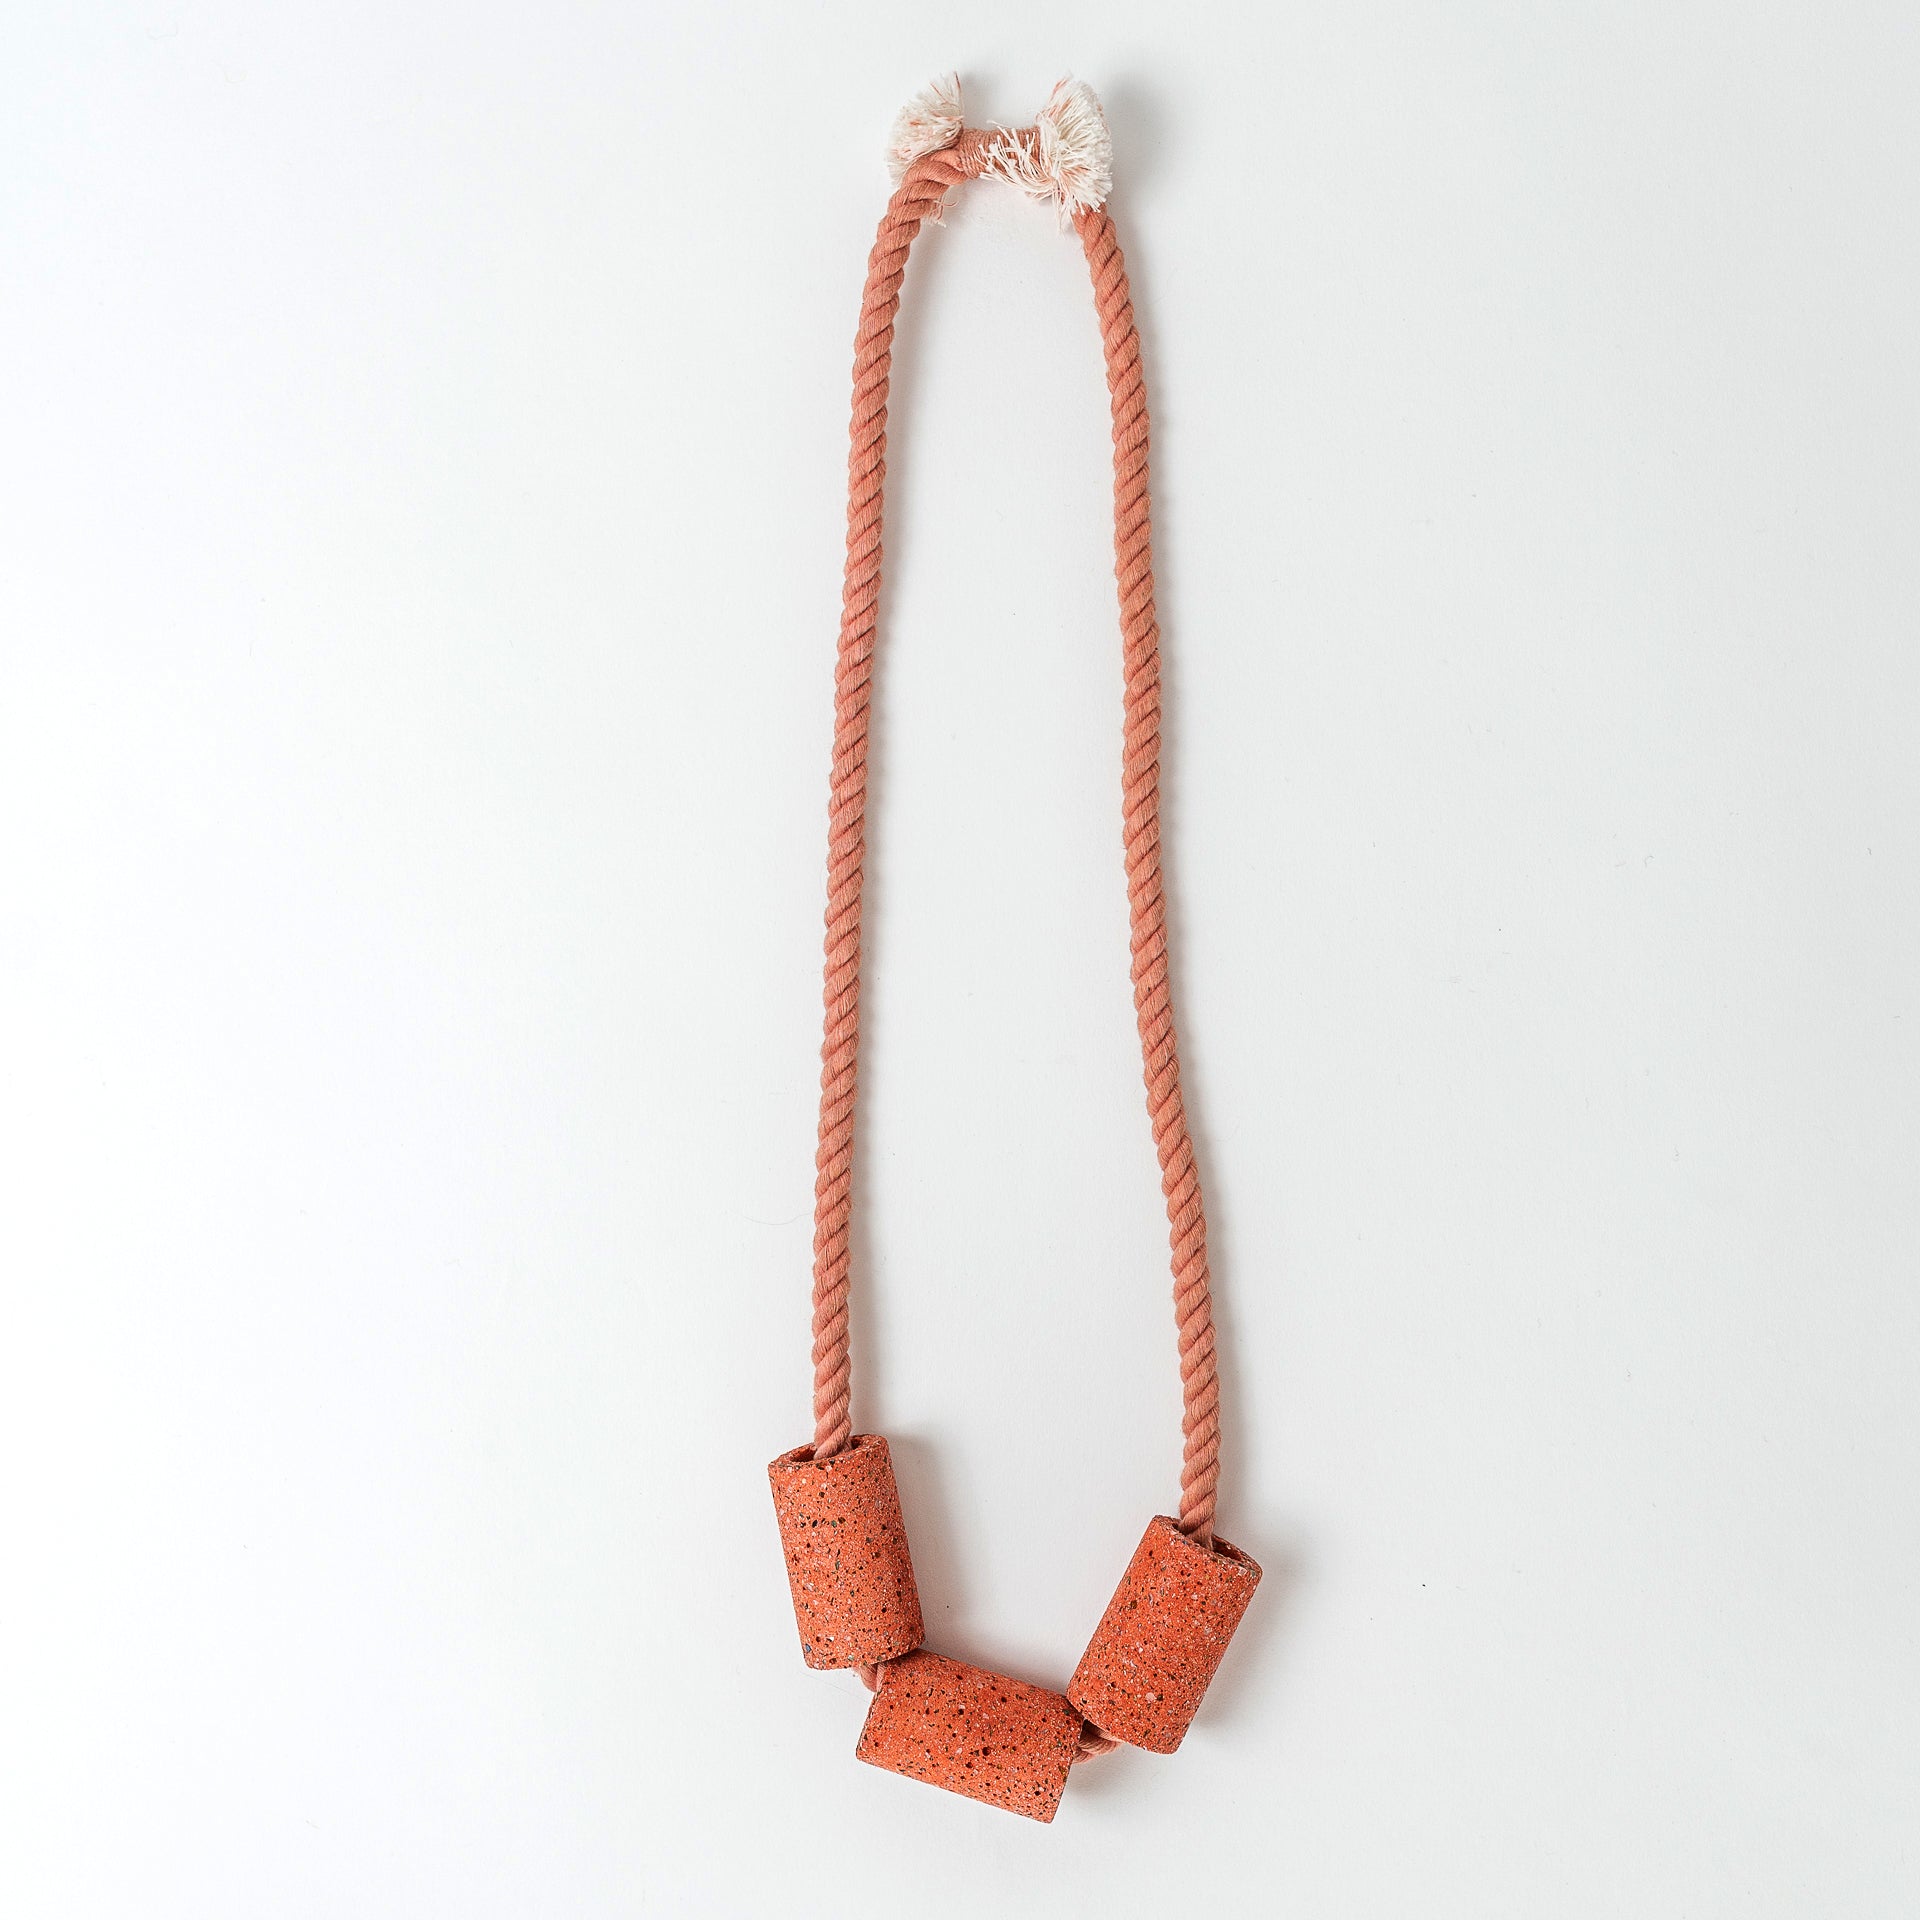 Dyed cotton rope necklace with handmade terrazzo beads in coral.